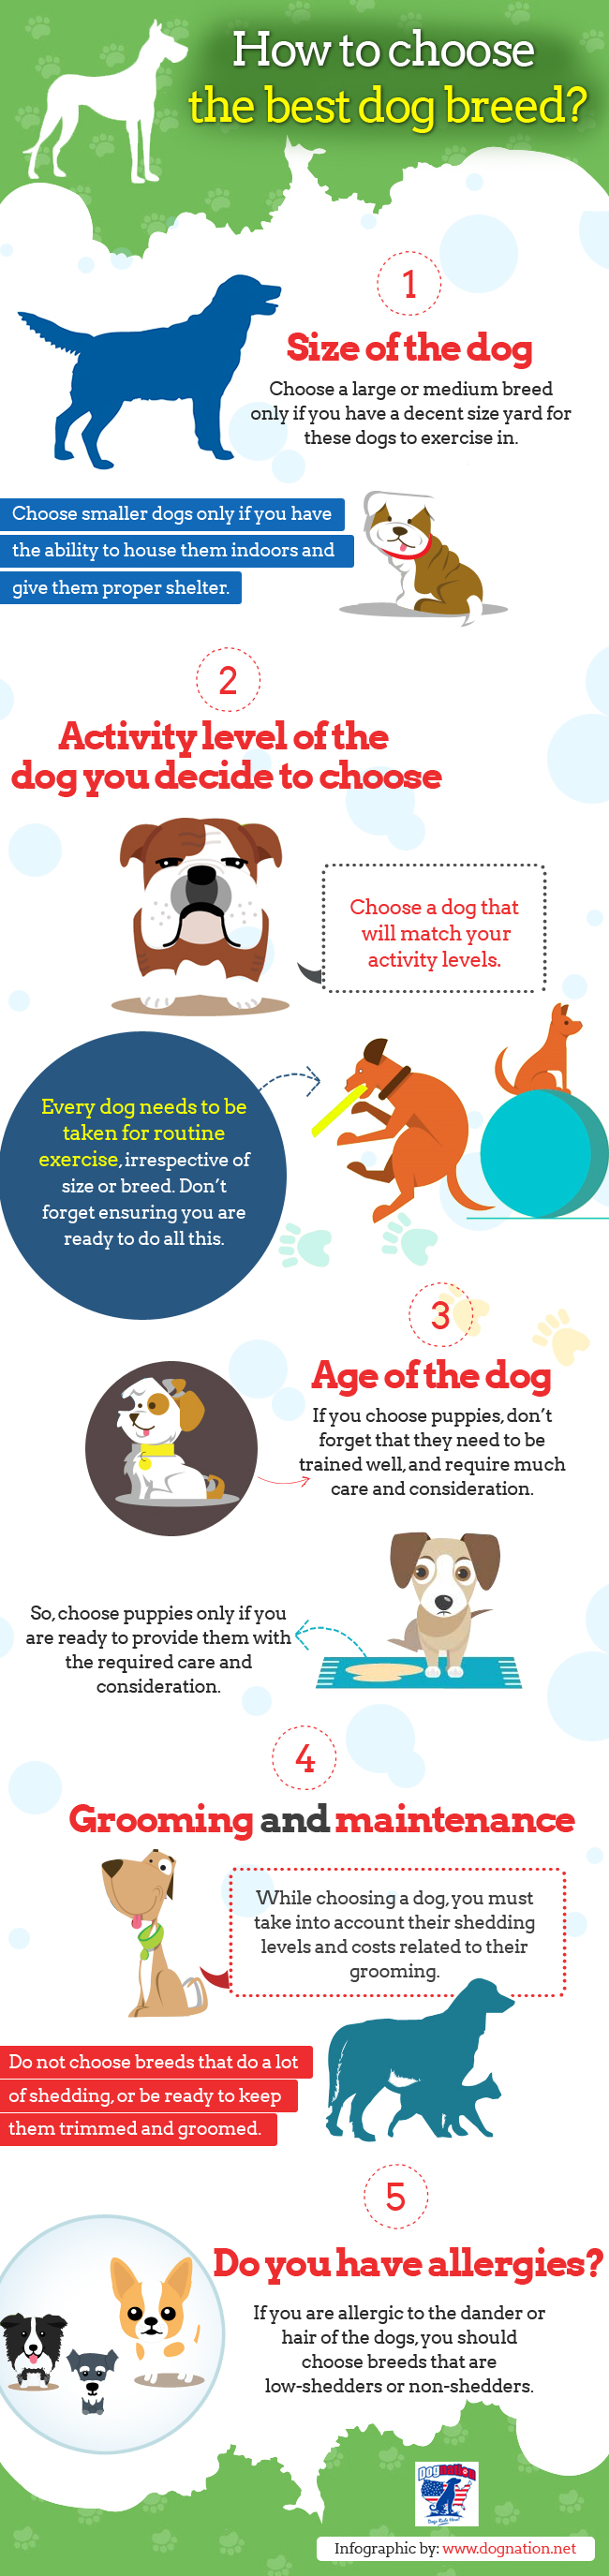 How to choose the best dog breed? | Visual.ly